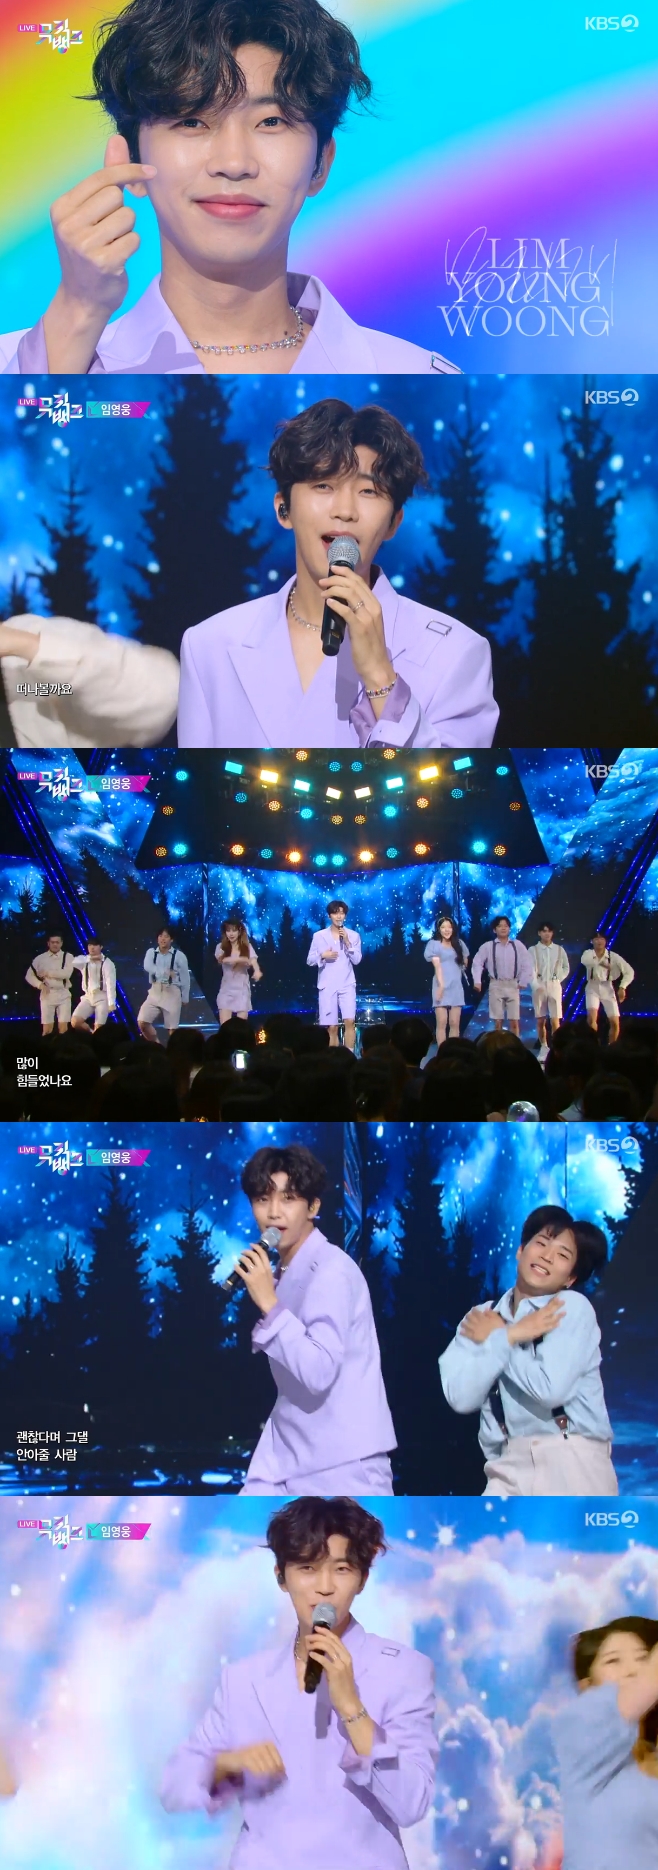 In Music Bank, singer Lim Young-woong gave a musical stage.24 Days In the afternoon Music Bank, Lim Young-woong enjoyed the fans ears with his new song The Rainbow.Lim Young-woong appeared on the bench wearing a set-up of the year.As if watching musical, he showed perfect live with cute choreography and focused his attention on the dance brake in the middle of the song.The Rainbow is a song by Lim Young-woong on IM HERO released on February 2, Lets go together. Were carrying a backpack full of happiness.I will leave the frustrating daily life and the city center. It is an impressive song with fresh lyrics and exciting melody.On the other hand, Music Bank appeared on ENHYPEN, IVE, Card, Le Serapim, NMIXX, STAYC, Tan, Tomorrow By Together, Kim Woo Suk, Na Yeon, Moon Bin, Moon Soo A, (woman) children, gifted, Won Ho, Girl of the Month, Lim Young-woong, Kepler, Pentagon, Promis Nine I do.